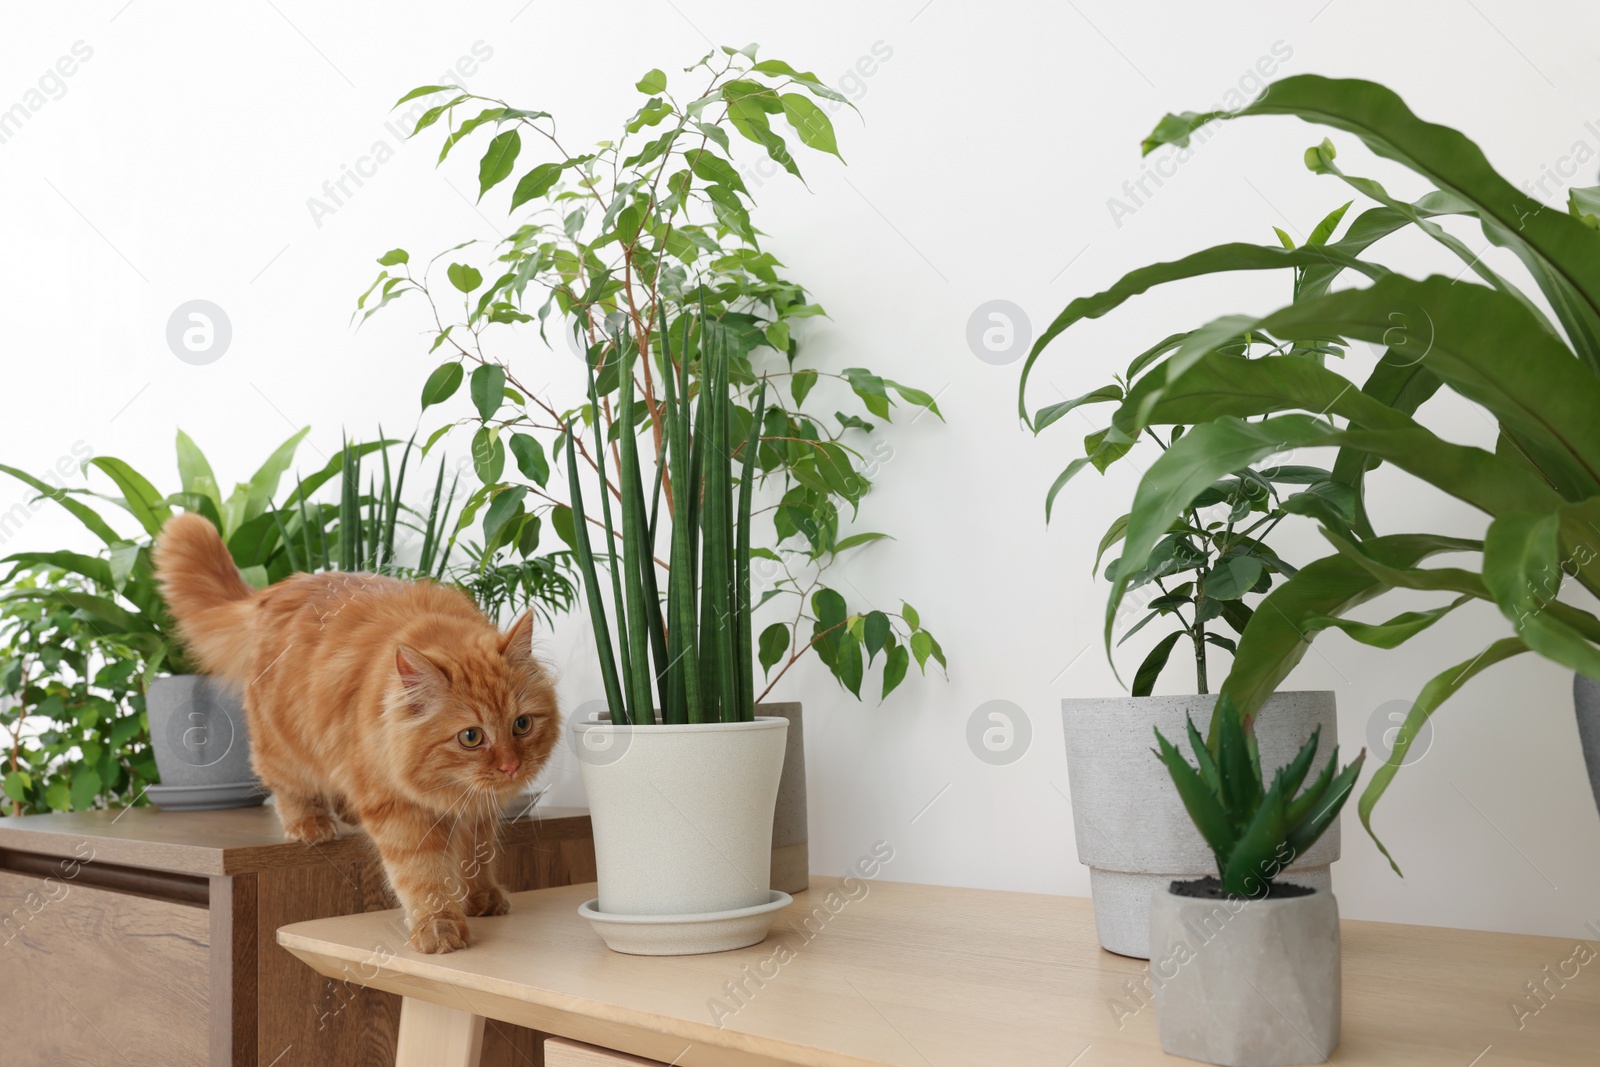 Photo of Adorable cat near green houseplants on wooden table at home